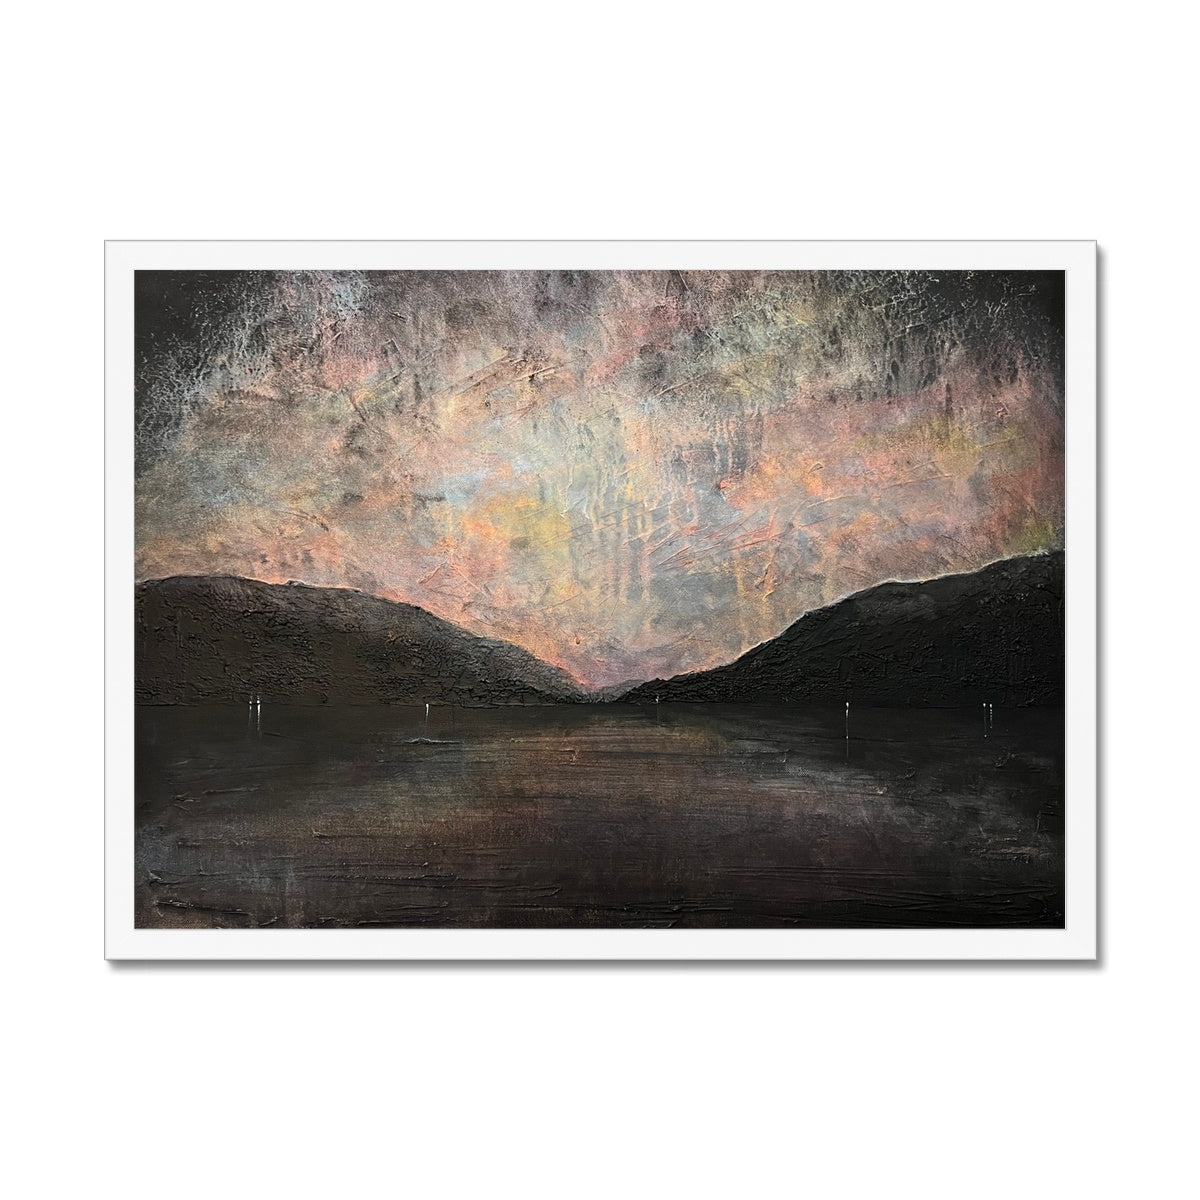 A Brooding Loch Lomond Painting | Framed Prints From Scotland-Framed Prints-Scottish Lochs & Mountains Art Gallery-A2 Landscape-White Frame-Paintings, Prints, Homeware, Art Gifts From Scotland By Scottish Artist Kevin Hunter